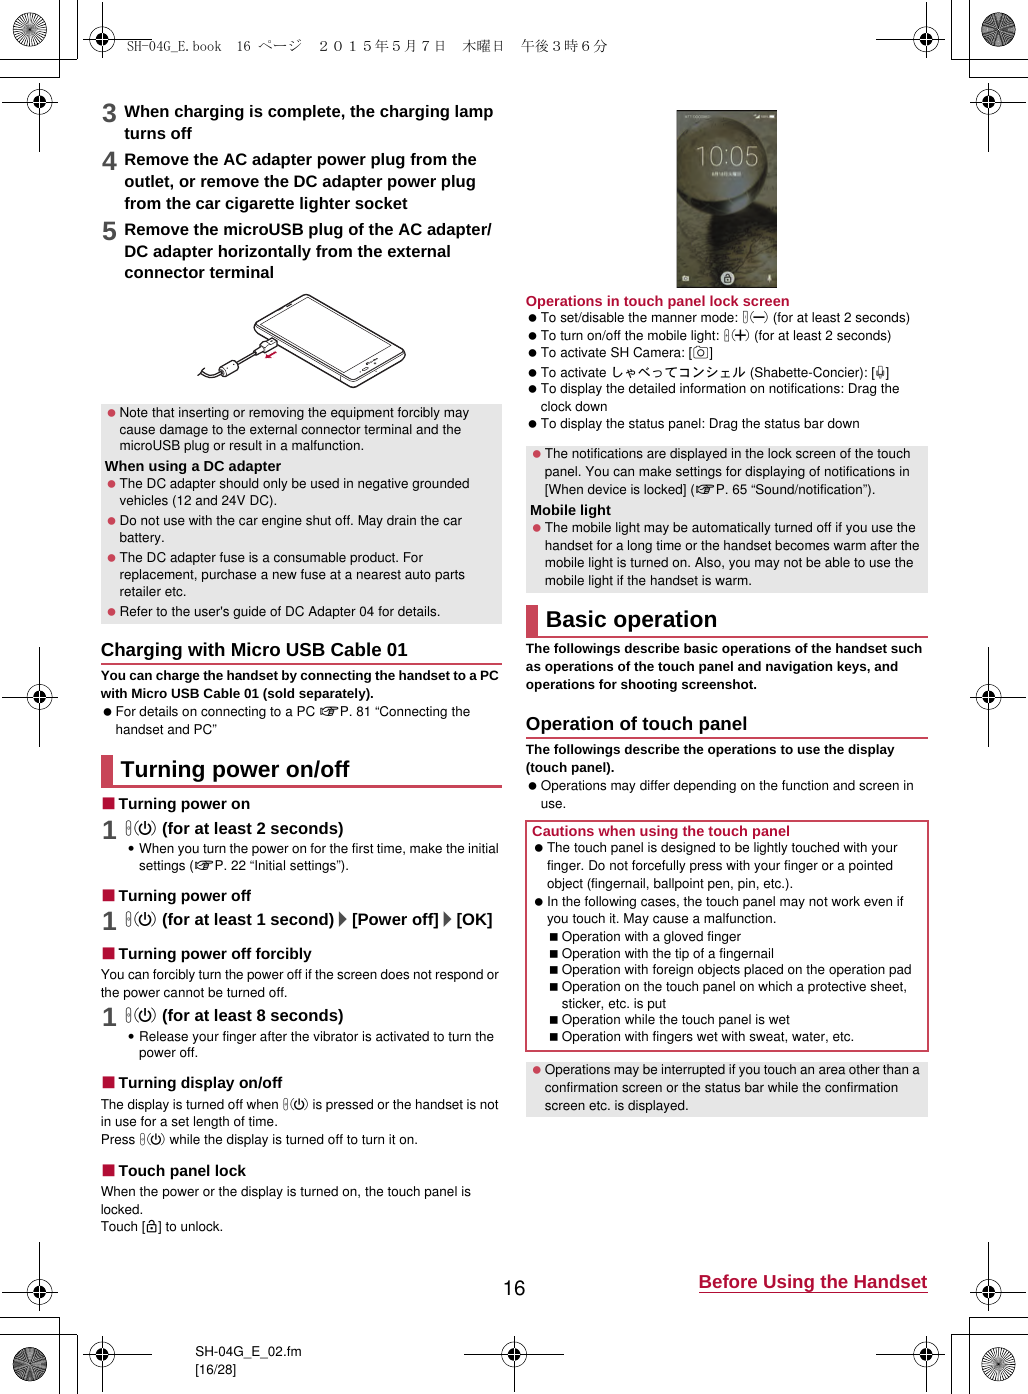 Page 12 of Sharp HRO00223 Cellular Phone User Manual 